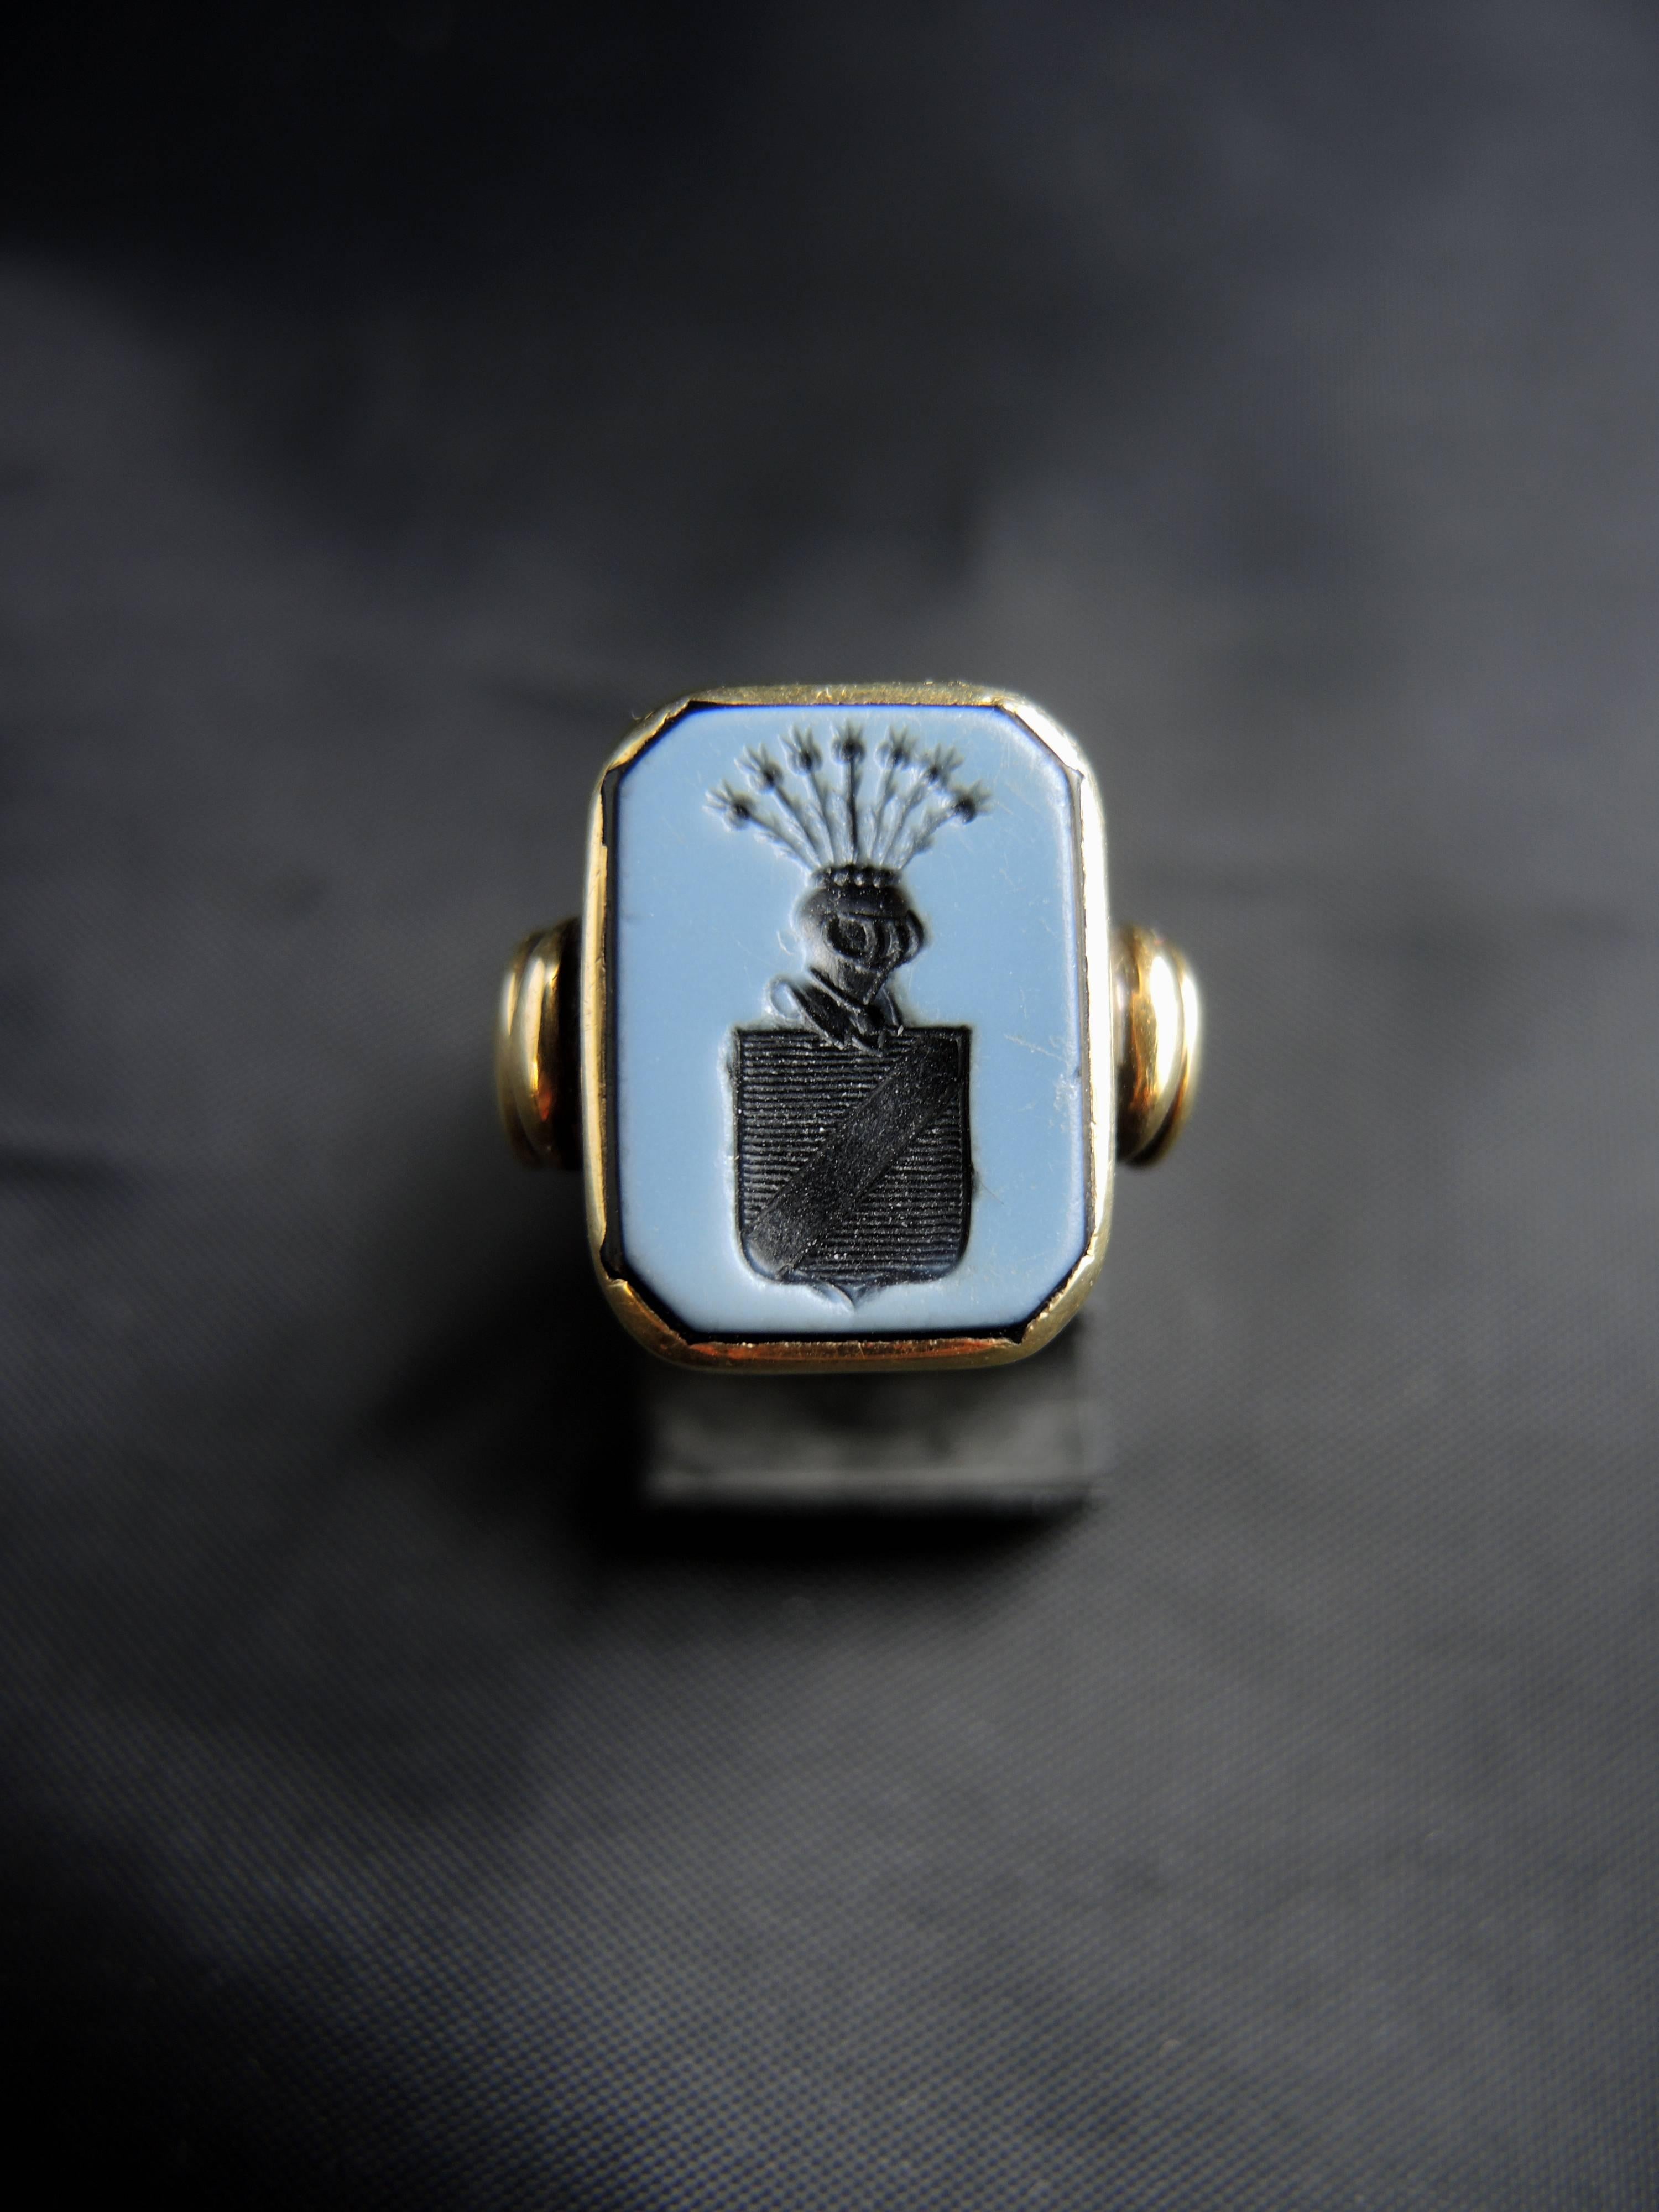 14kt gold signet ring (quality mark: scallop) with a nicolo cameo agate engraved of arms. 
Work from the 19th century.

Weight: 5,50g
Ring size: 56 (diameter 17/ US size 6,75)

State : little scratches on the gold parts, visible on the pictures.